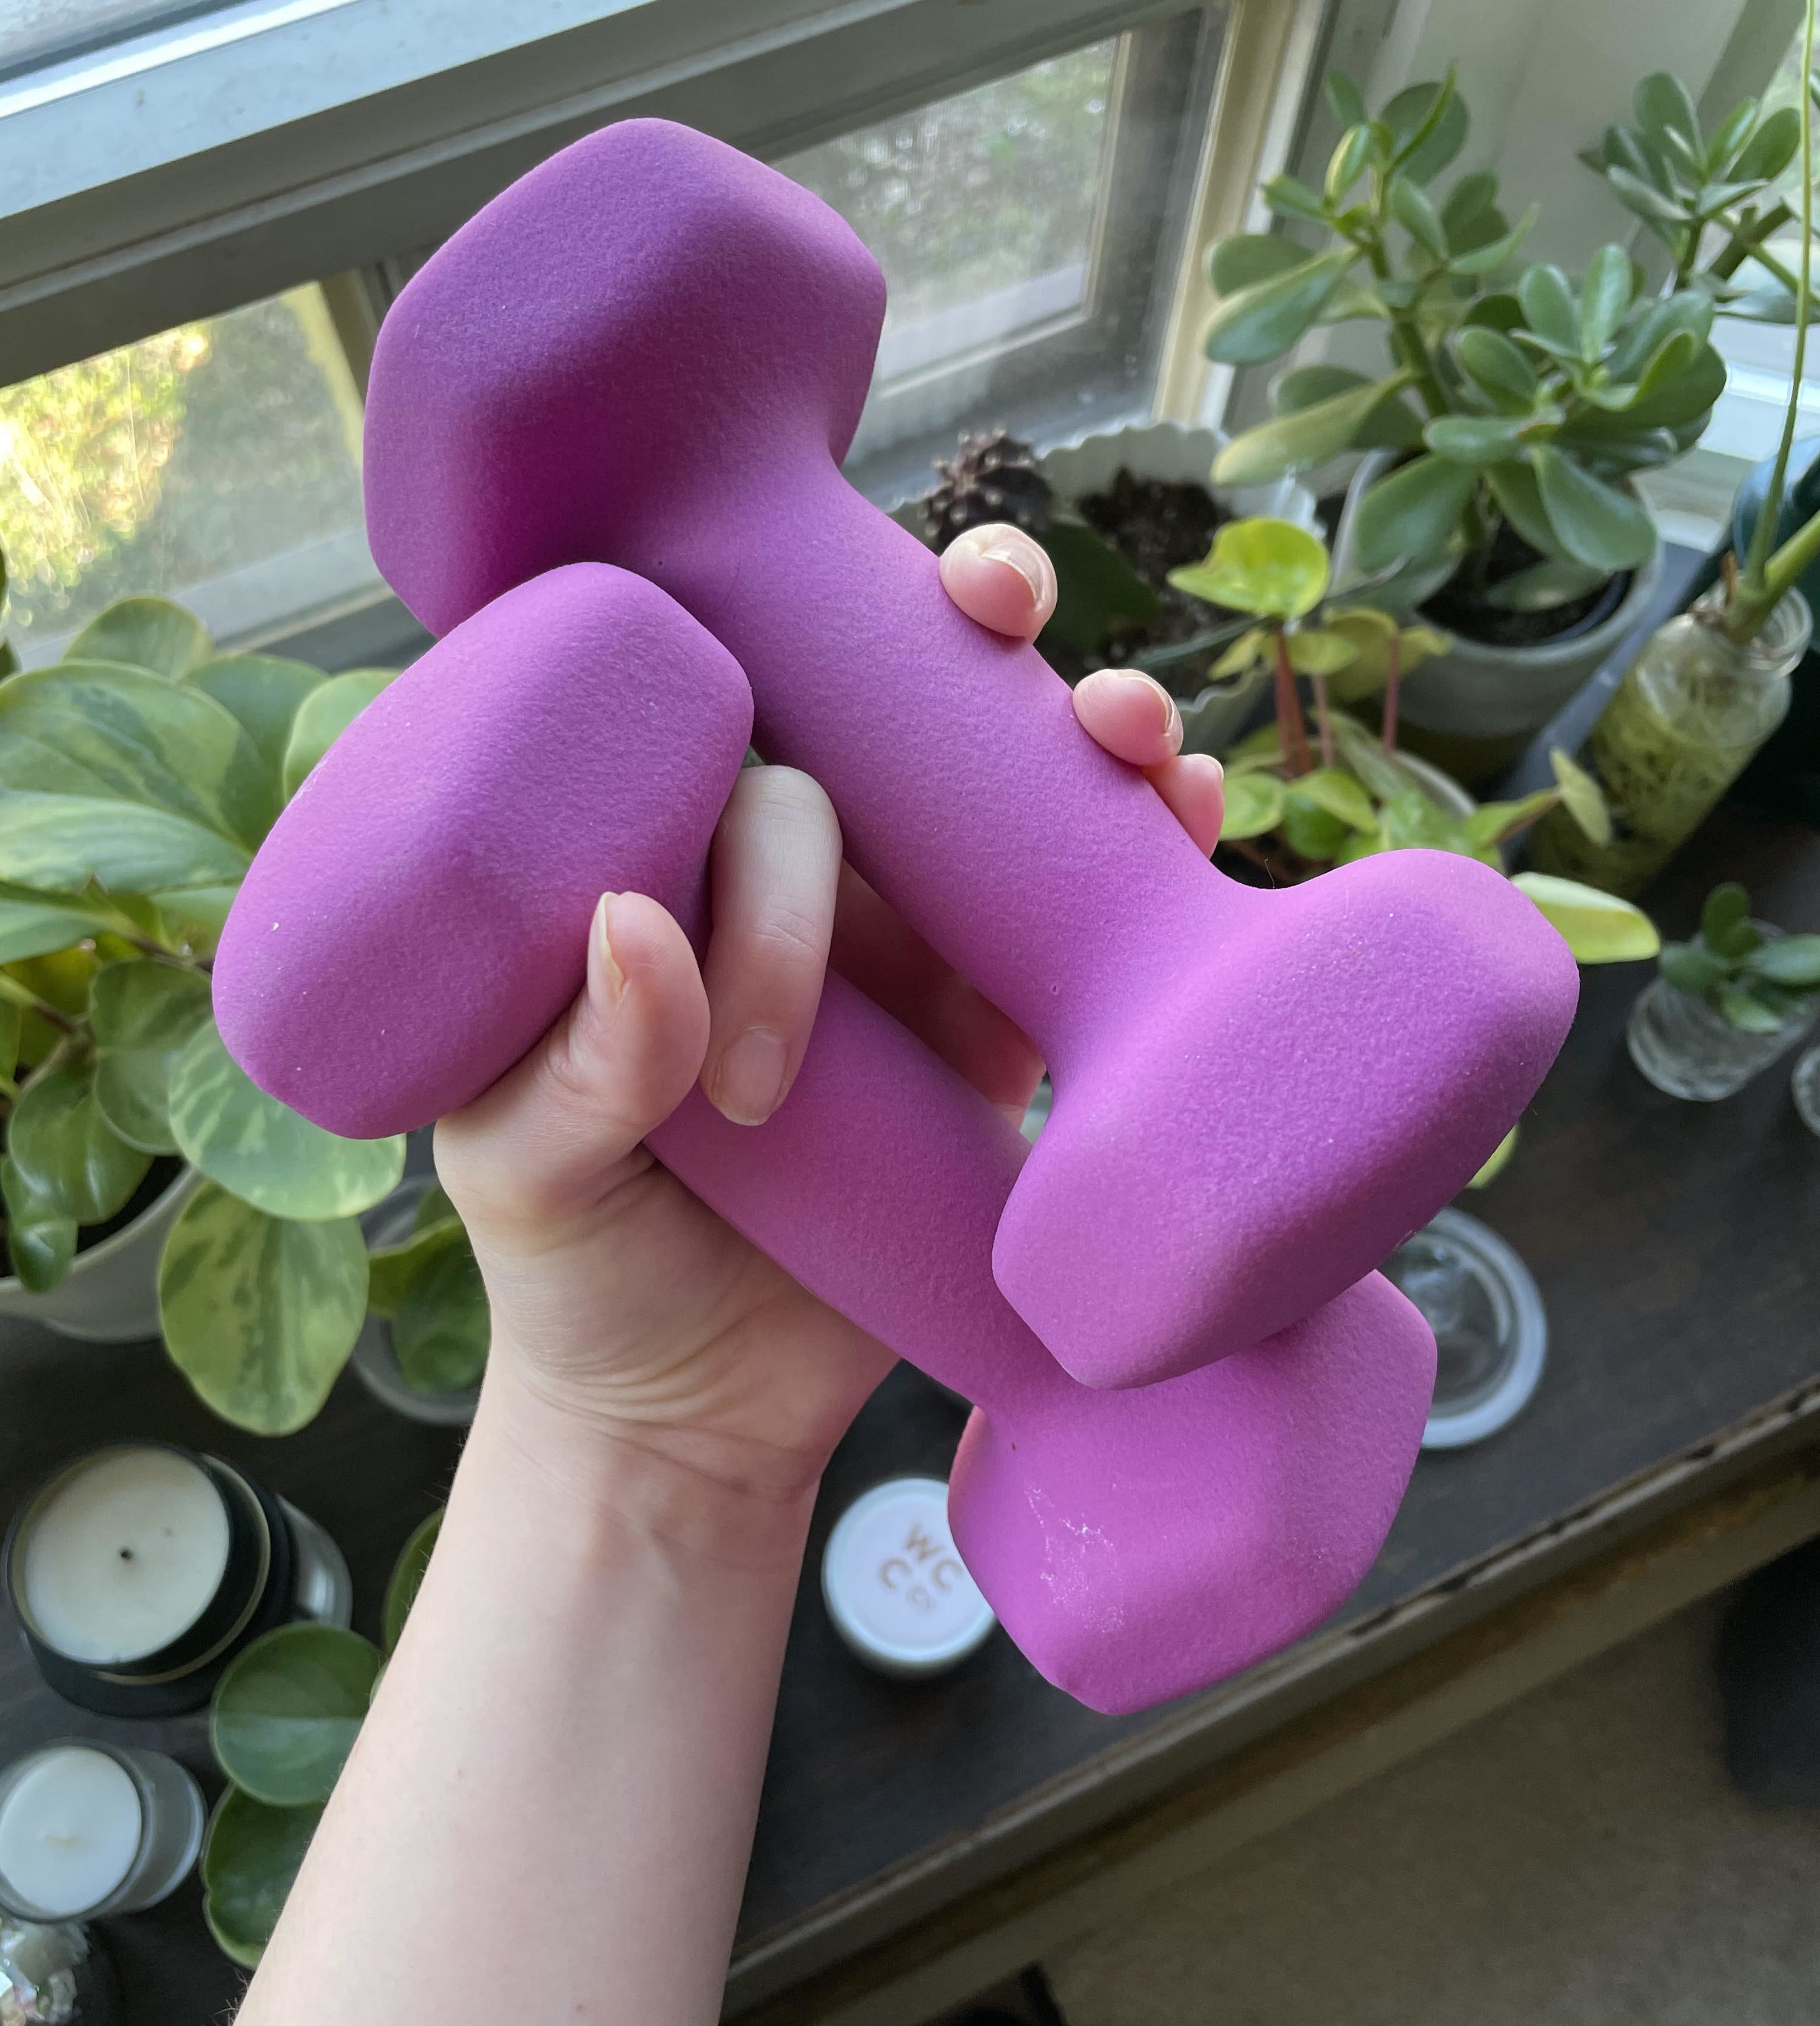 A person holding two dumbbells